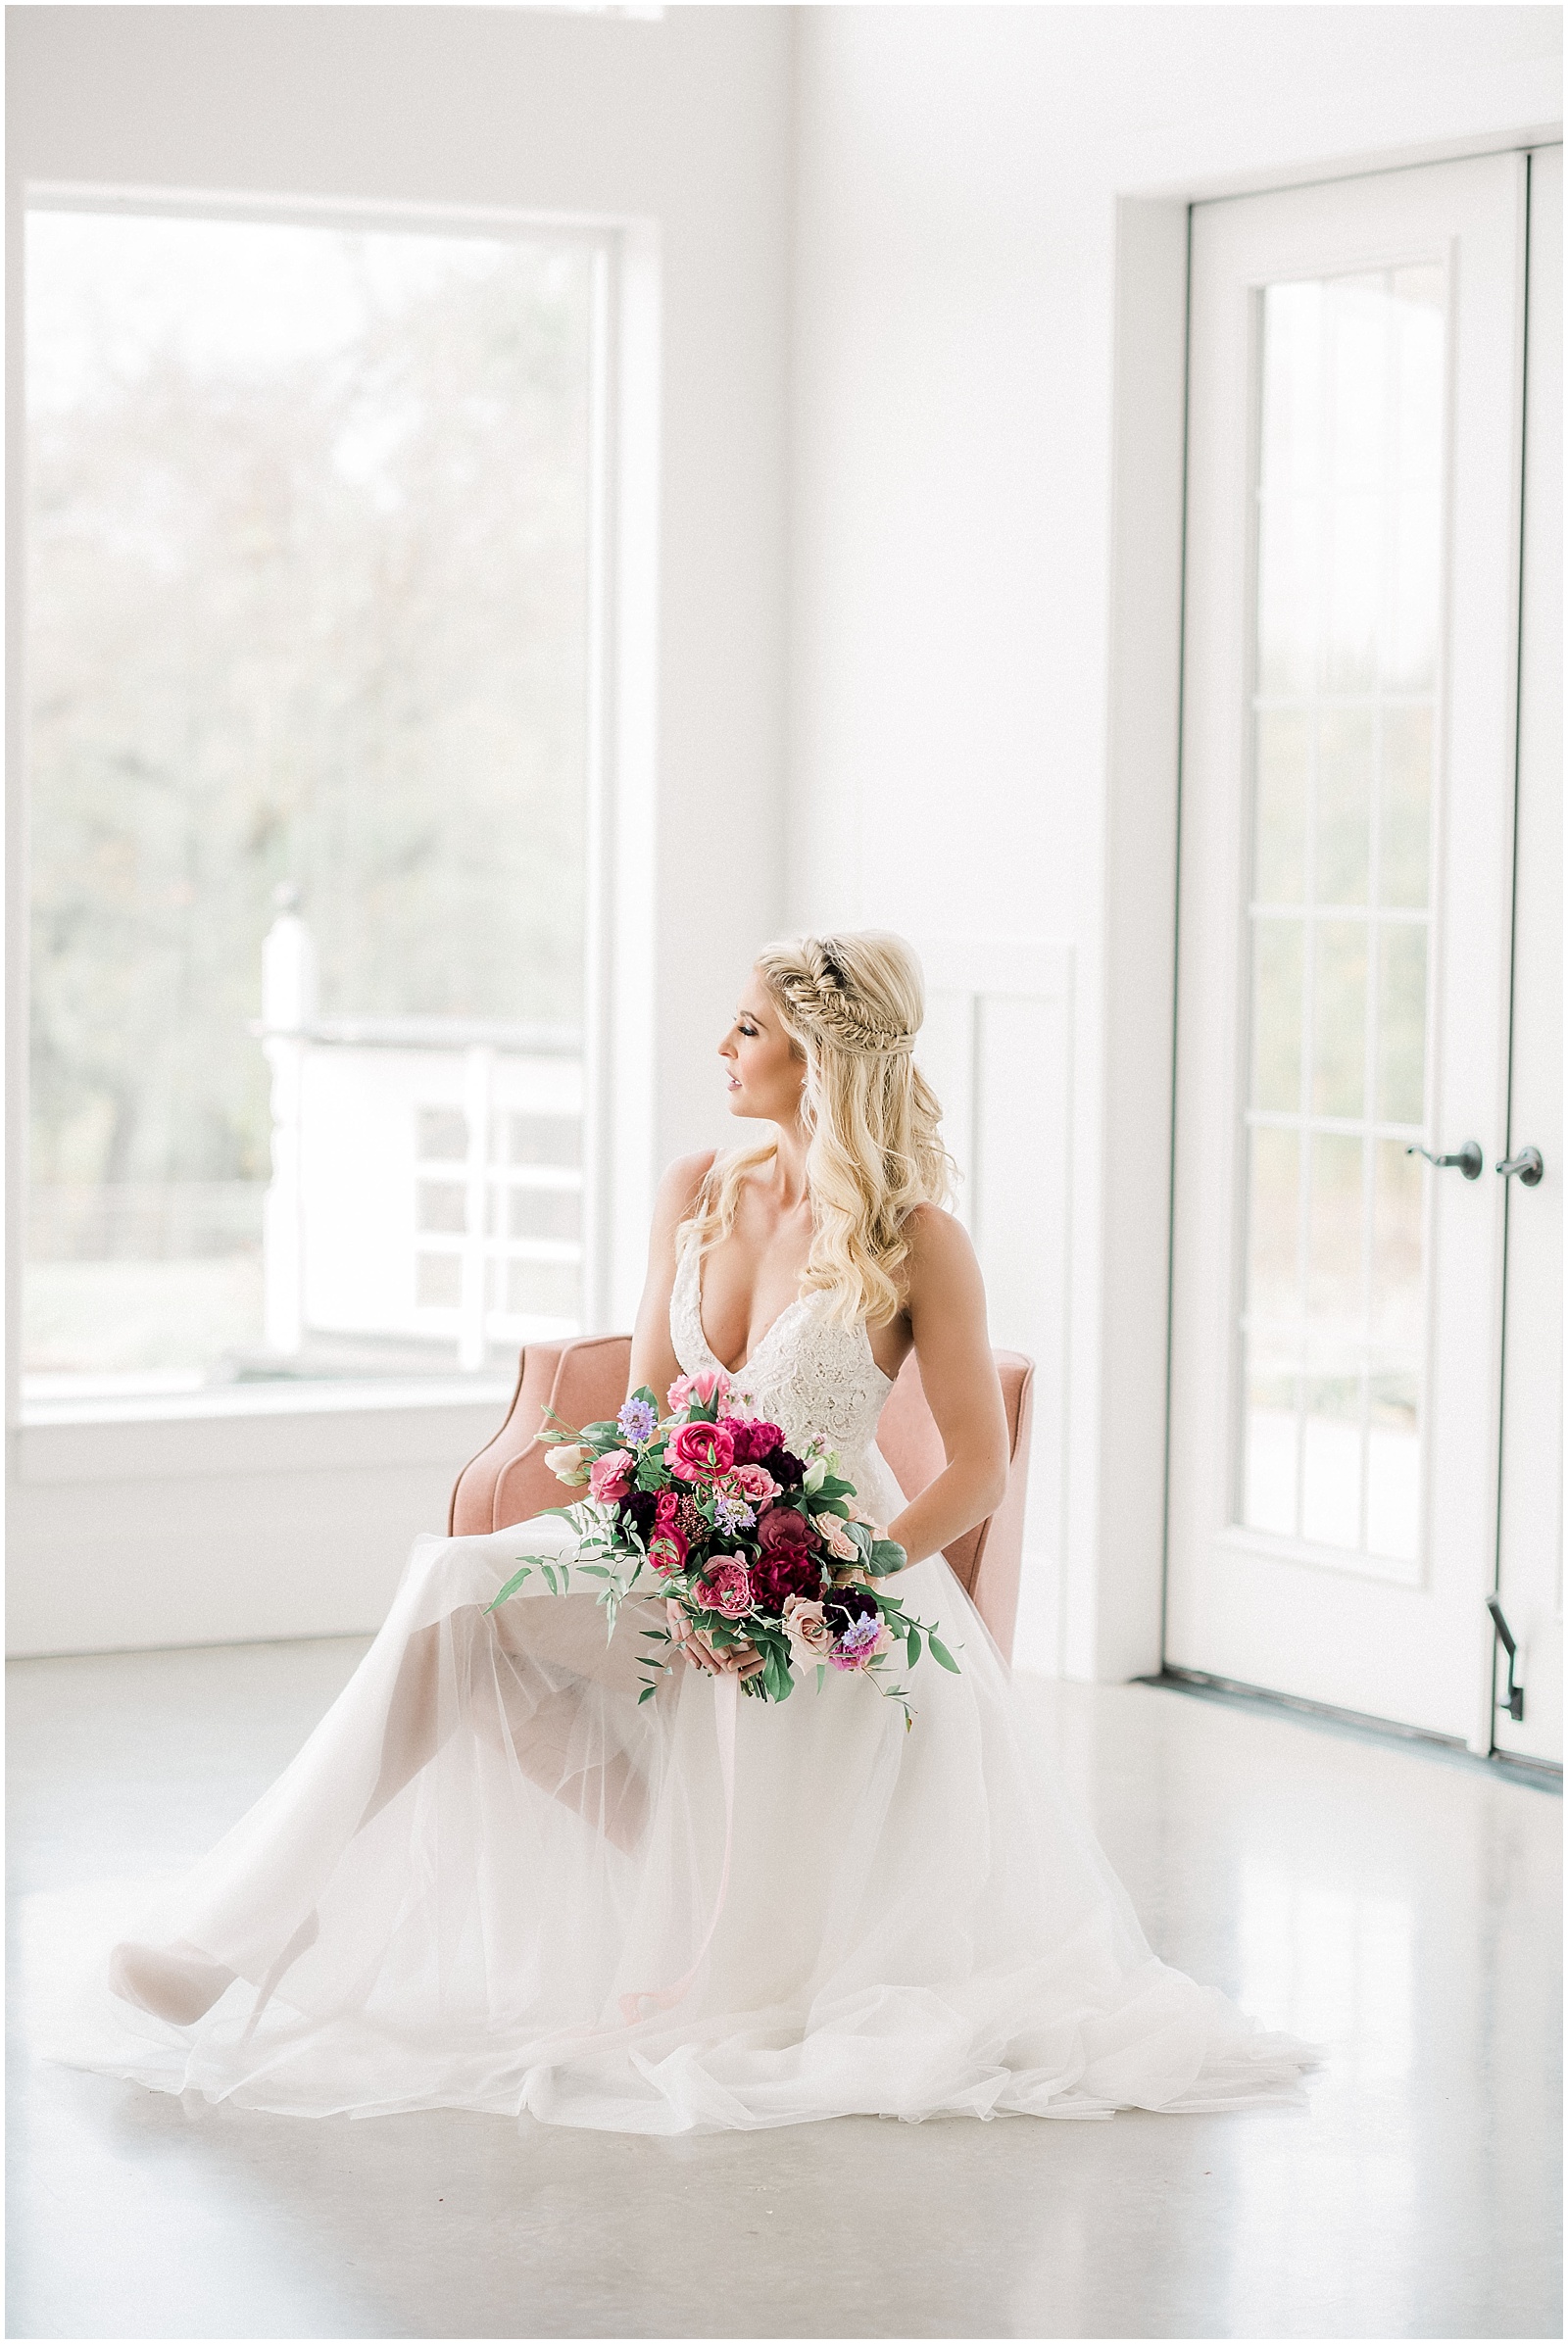 The Bridal Session Reasons To Have One Alba Rose Photography